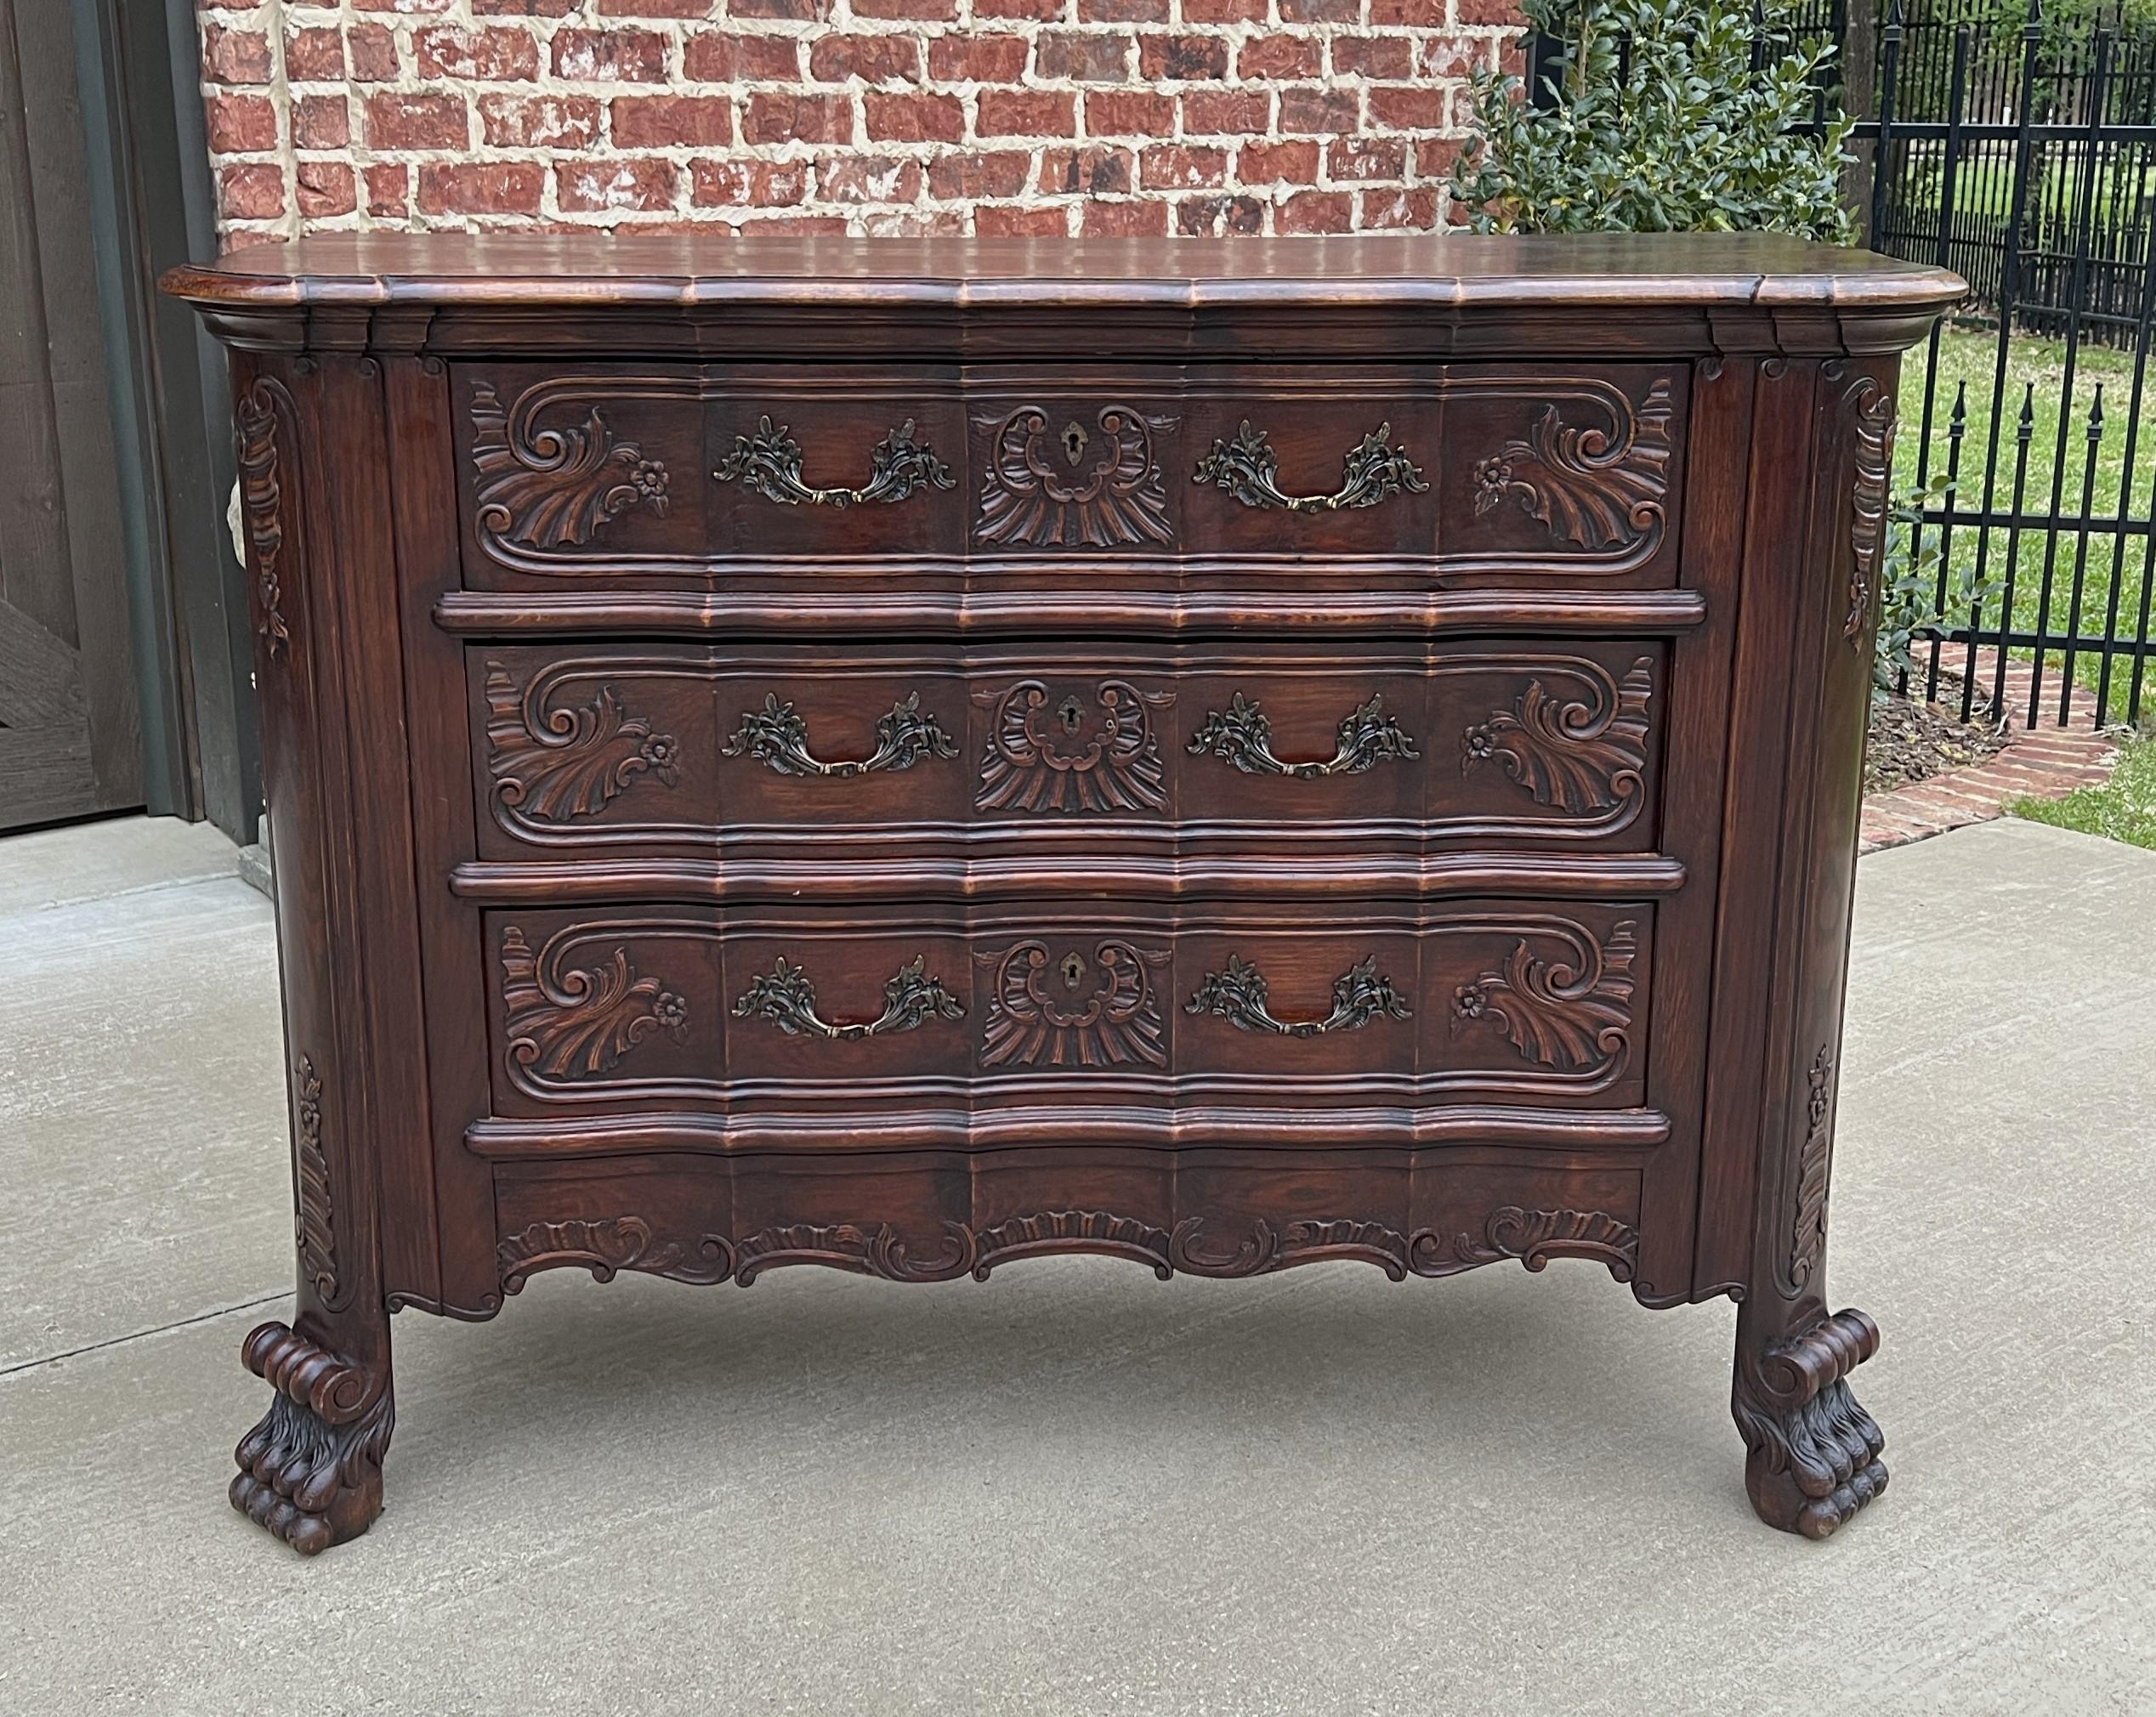 Beautiful Antique French Oak chest of drawers with 3 drawers and key~~HIGHLY CARVED~~ circa 1900-1920s

This is a SUPERB example of an antique classic French Country oak chest of drawers~~serpentine carved front with 3 dovetailed drawers, hairy